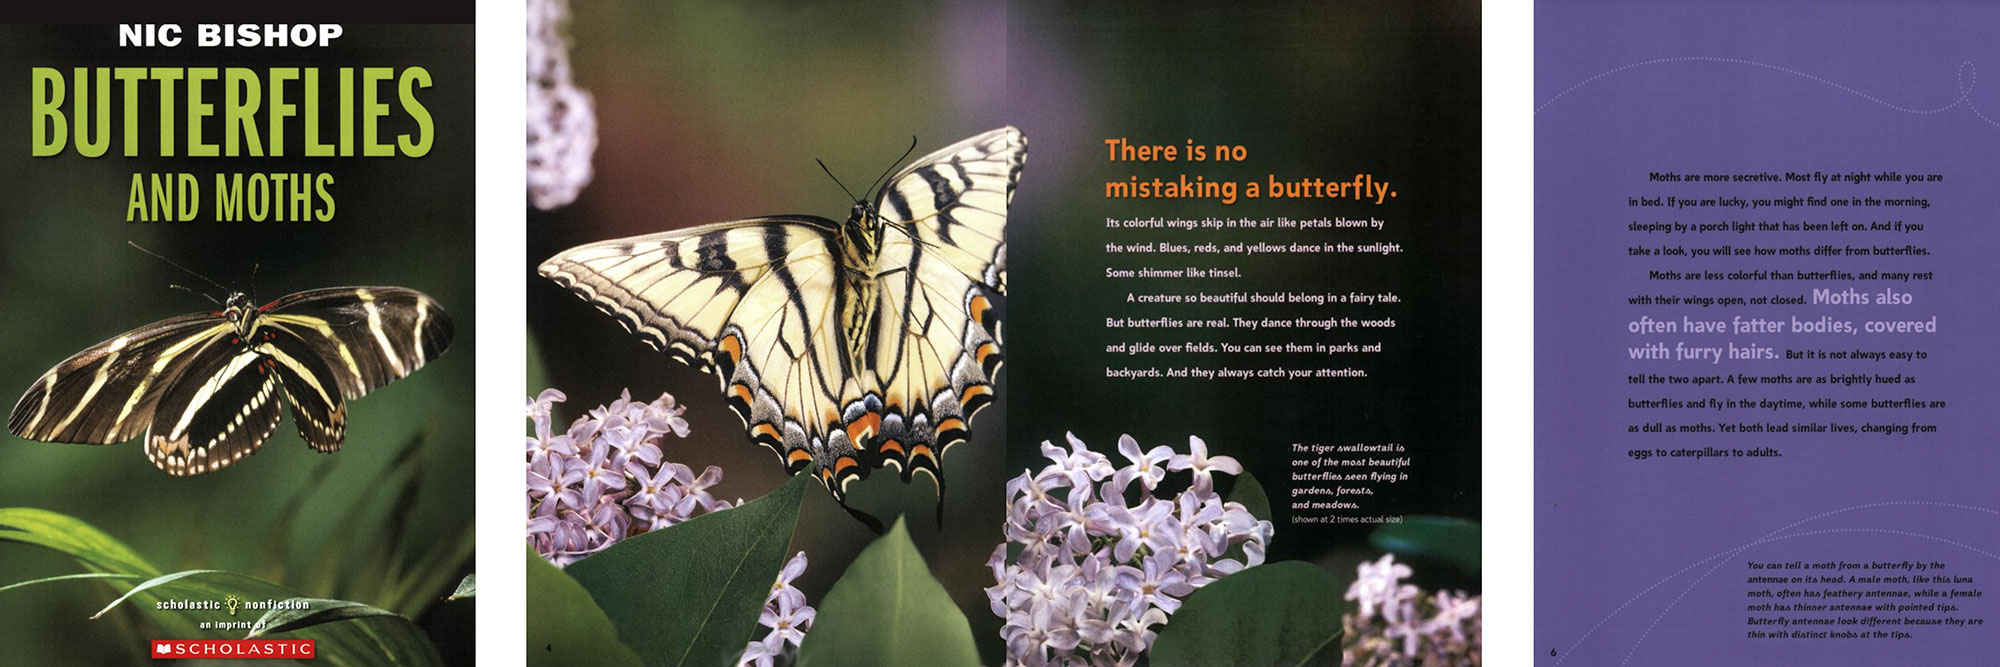 Images of butterflies and moths from children's book